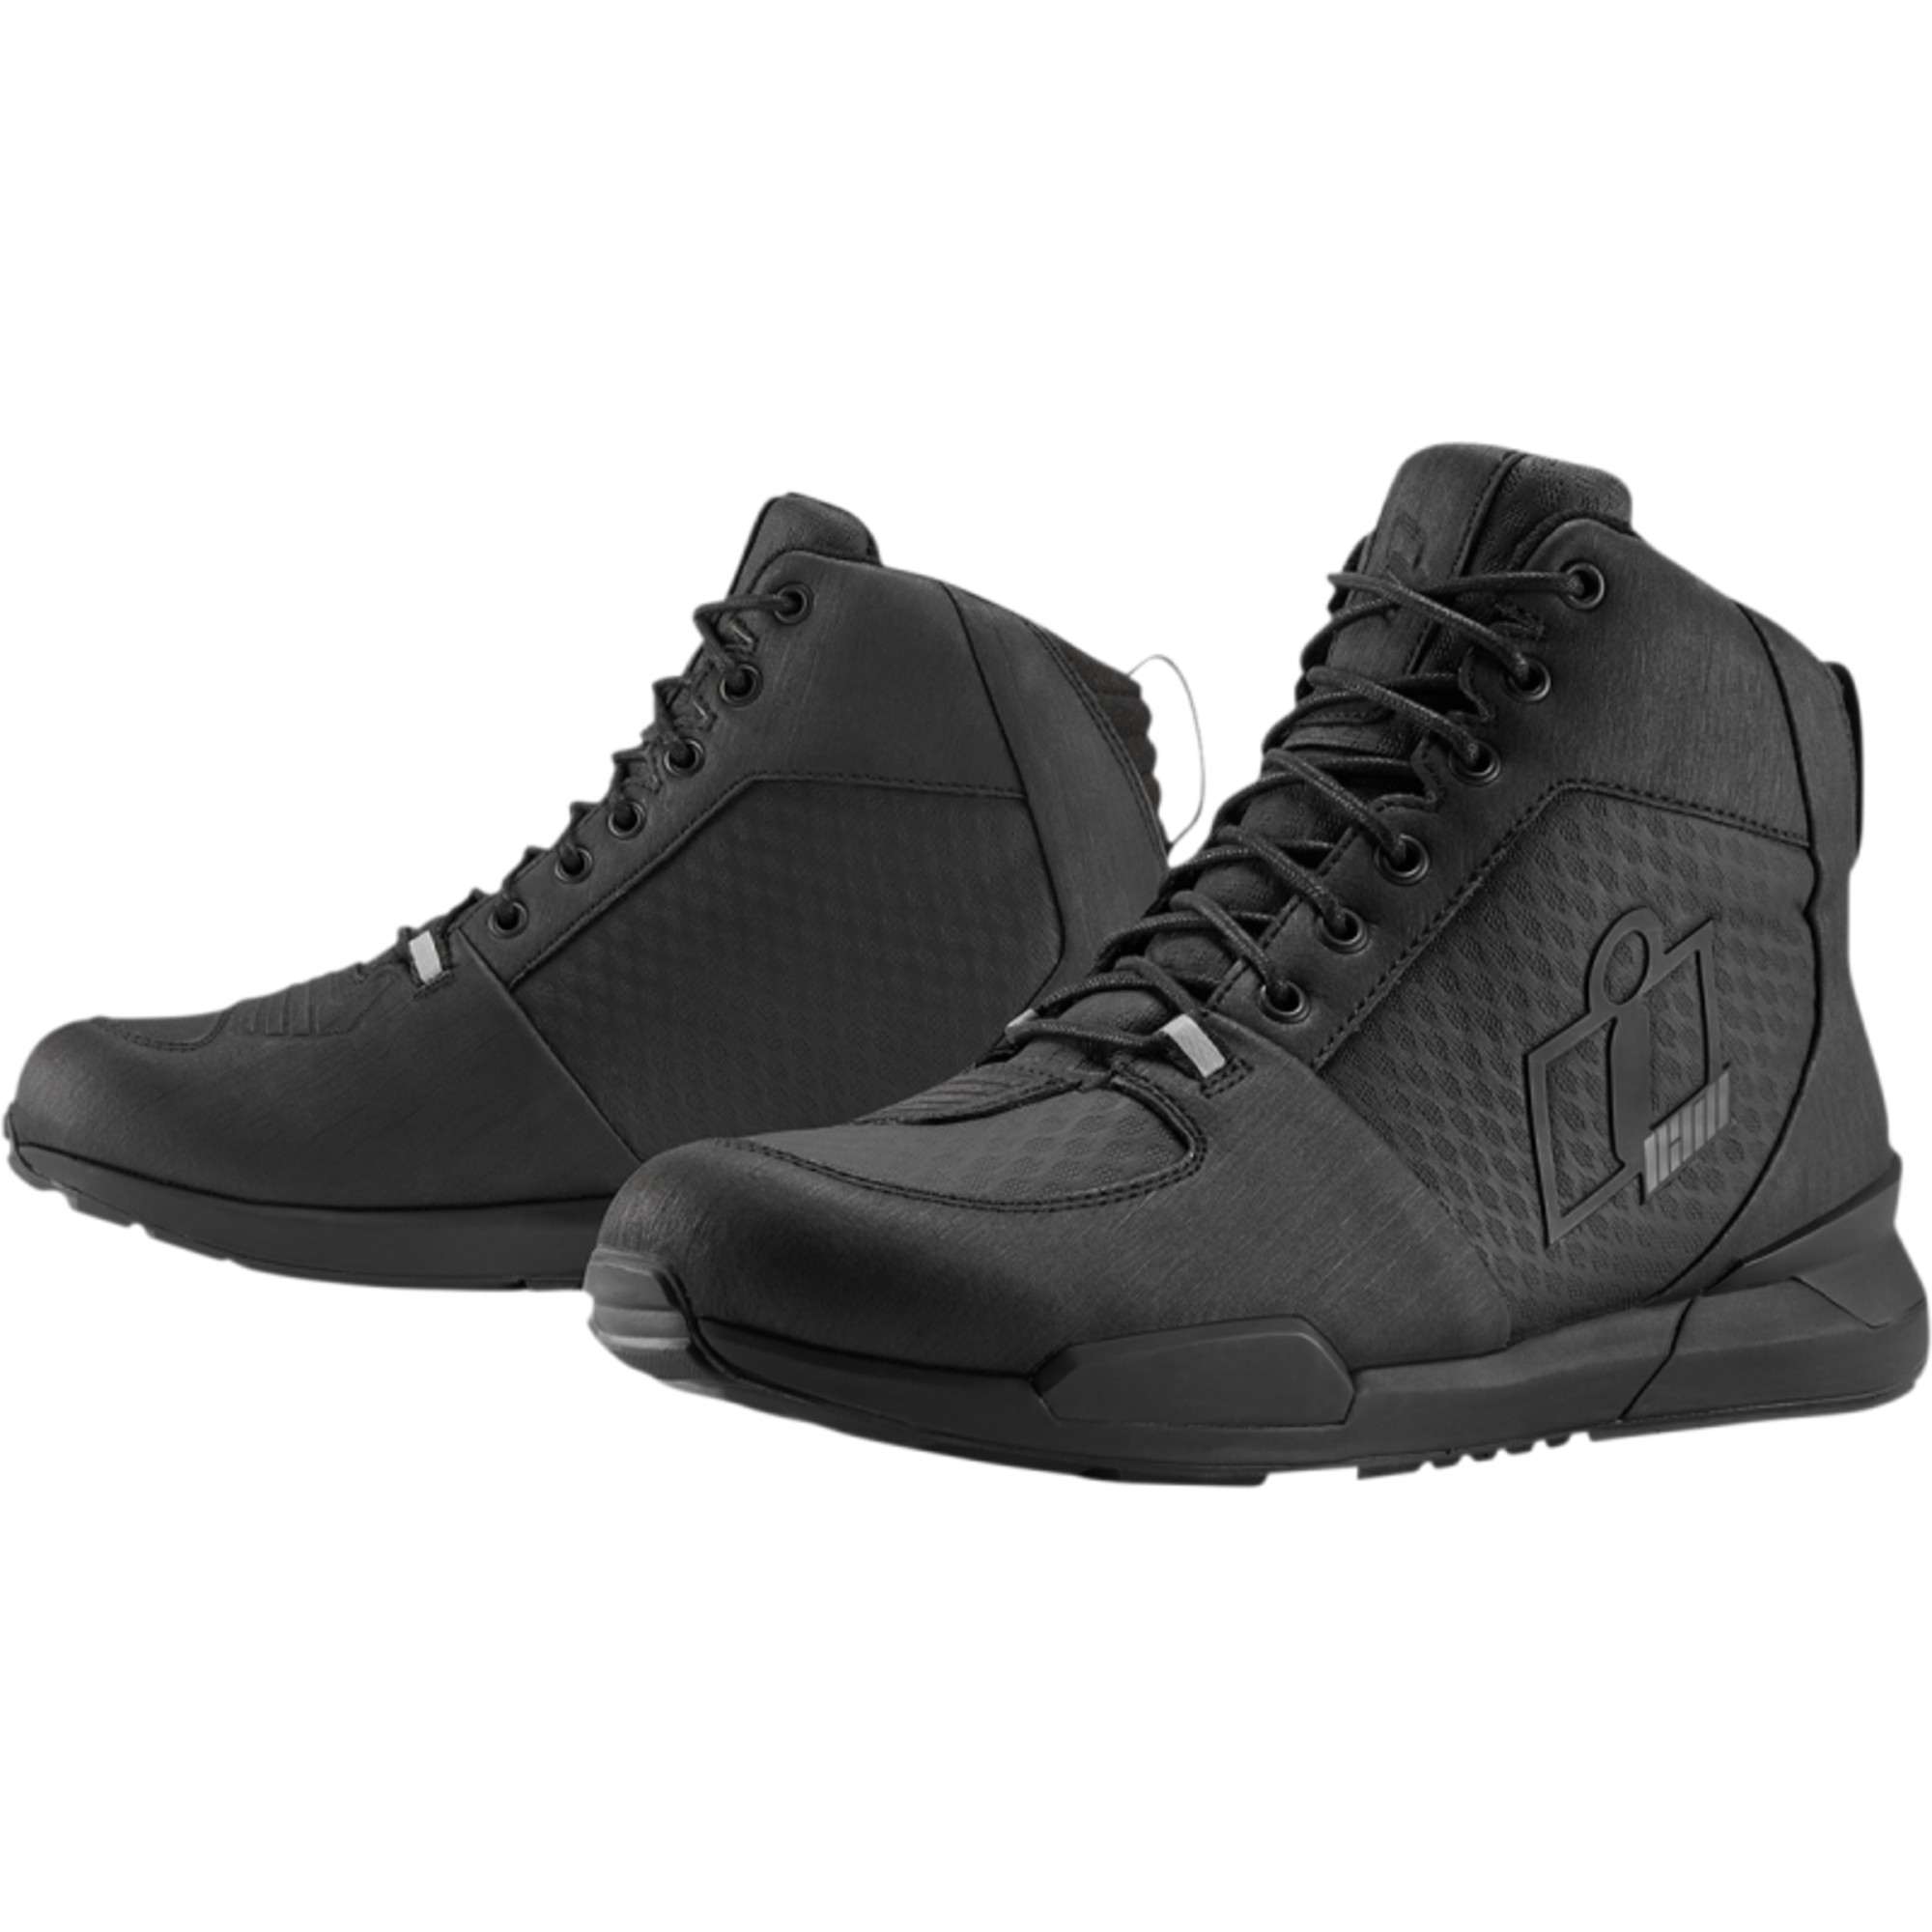 icon shoes boots for men tarmac wp